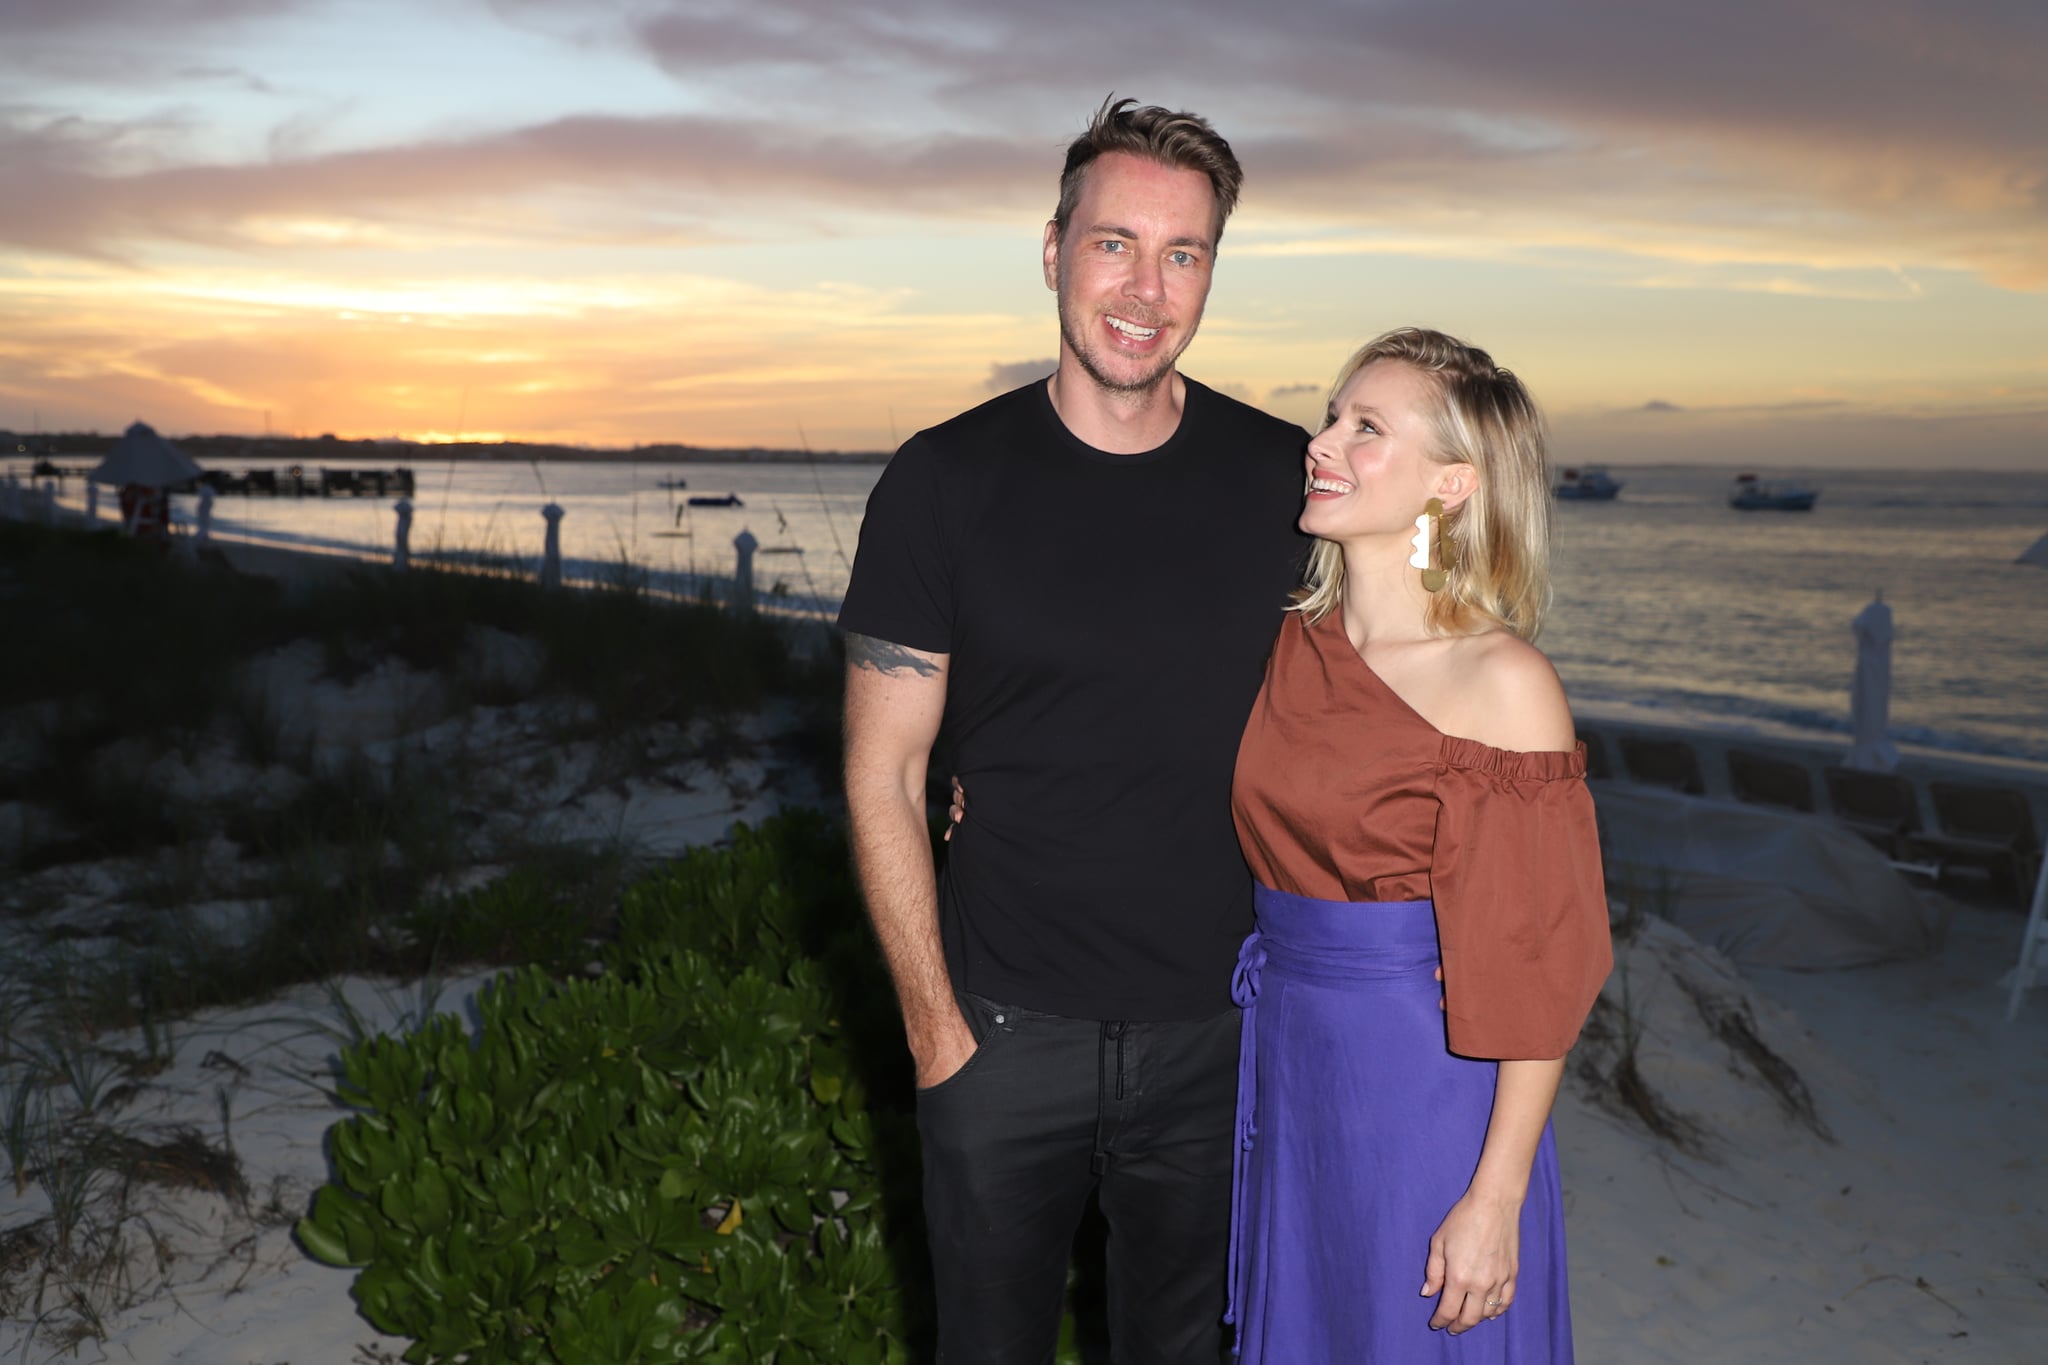 PROVIDENCIALES, PROVIDENCIALES - JANUARY 30:  Dax Shepard and Kristen Bell pose as she holidays with her family at Beaches Turks & Caicos Resort Villages & Spa on January 30, 2018 in Providenciales, Turks & Caicos.  (Photo by John Parra/Getty Images for Beaches)